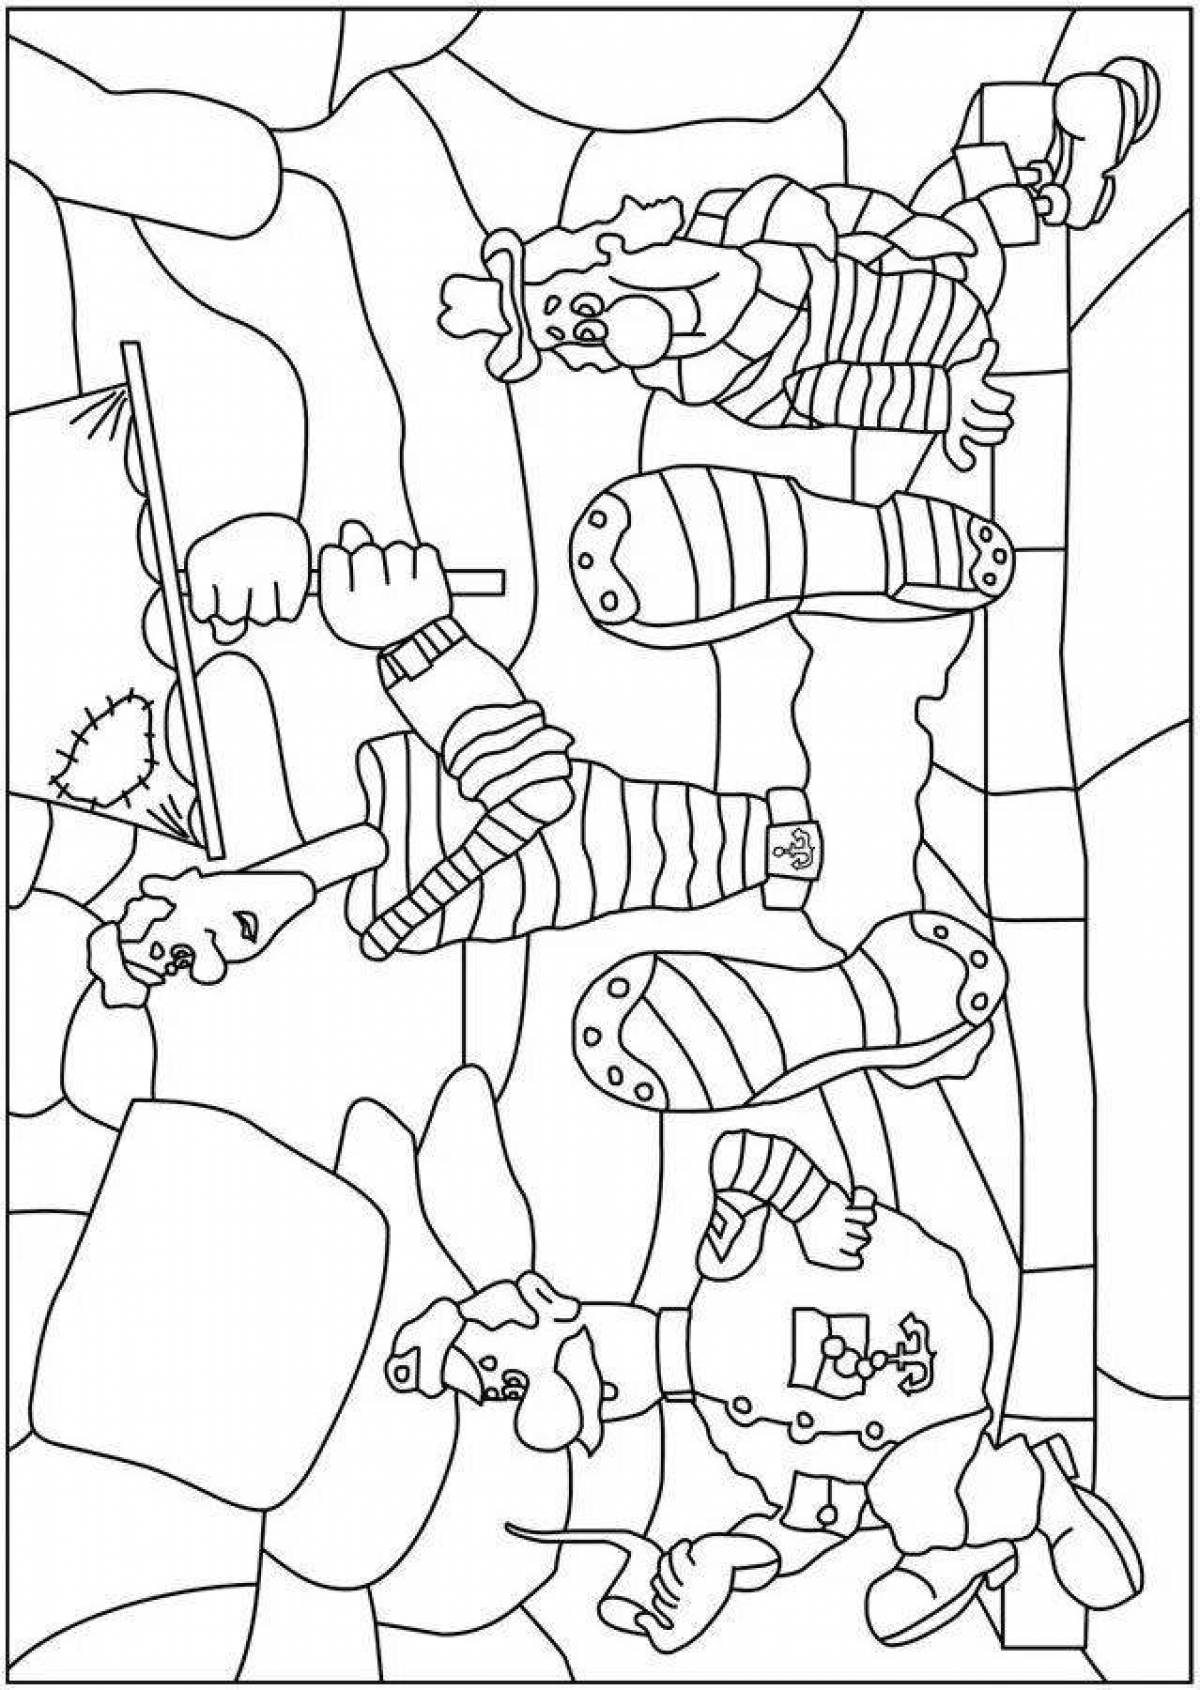 Funny captain vrungel coloring book